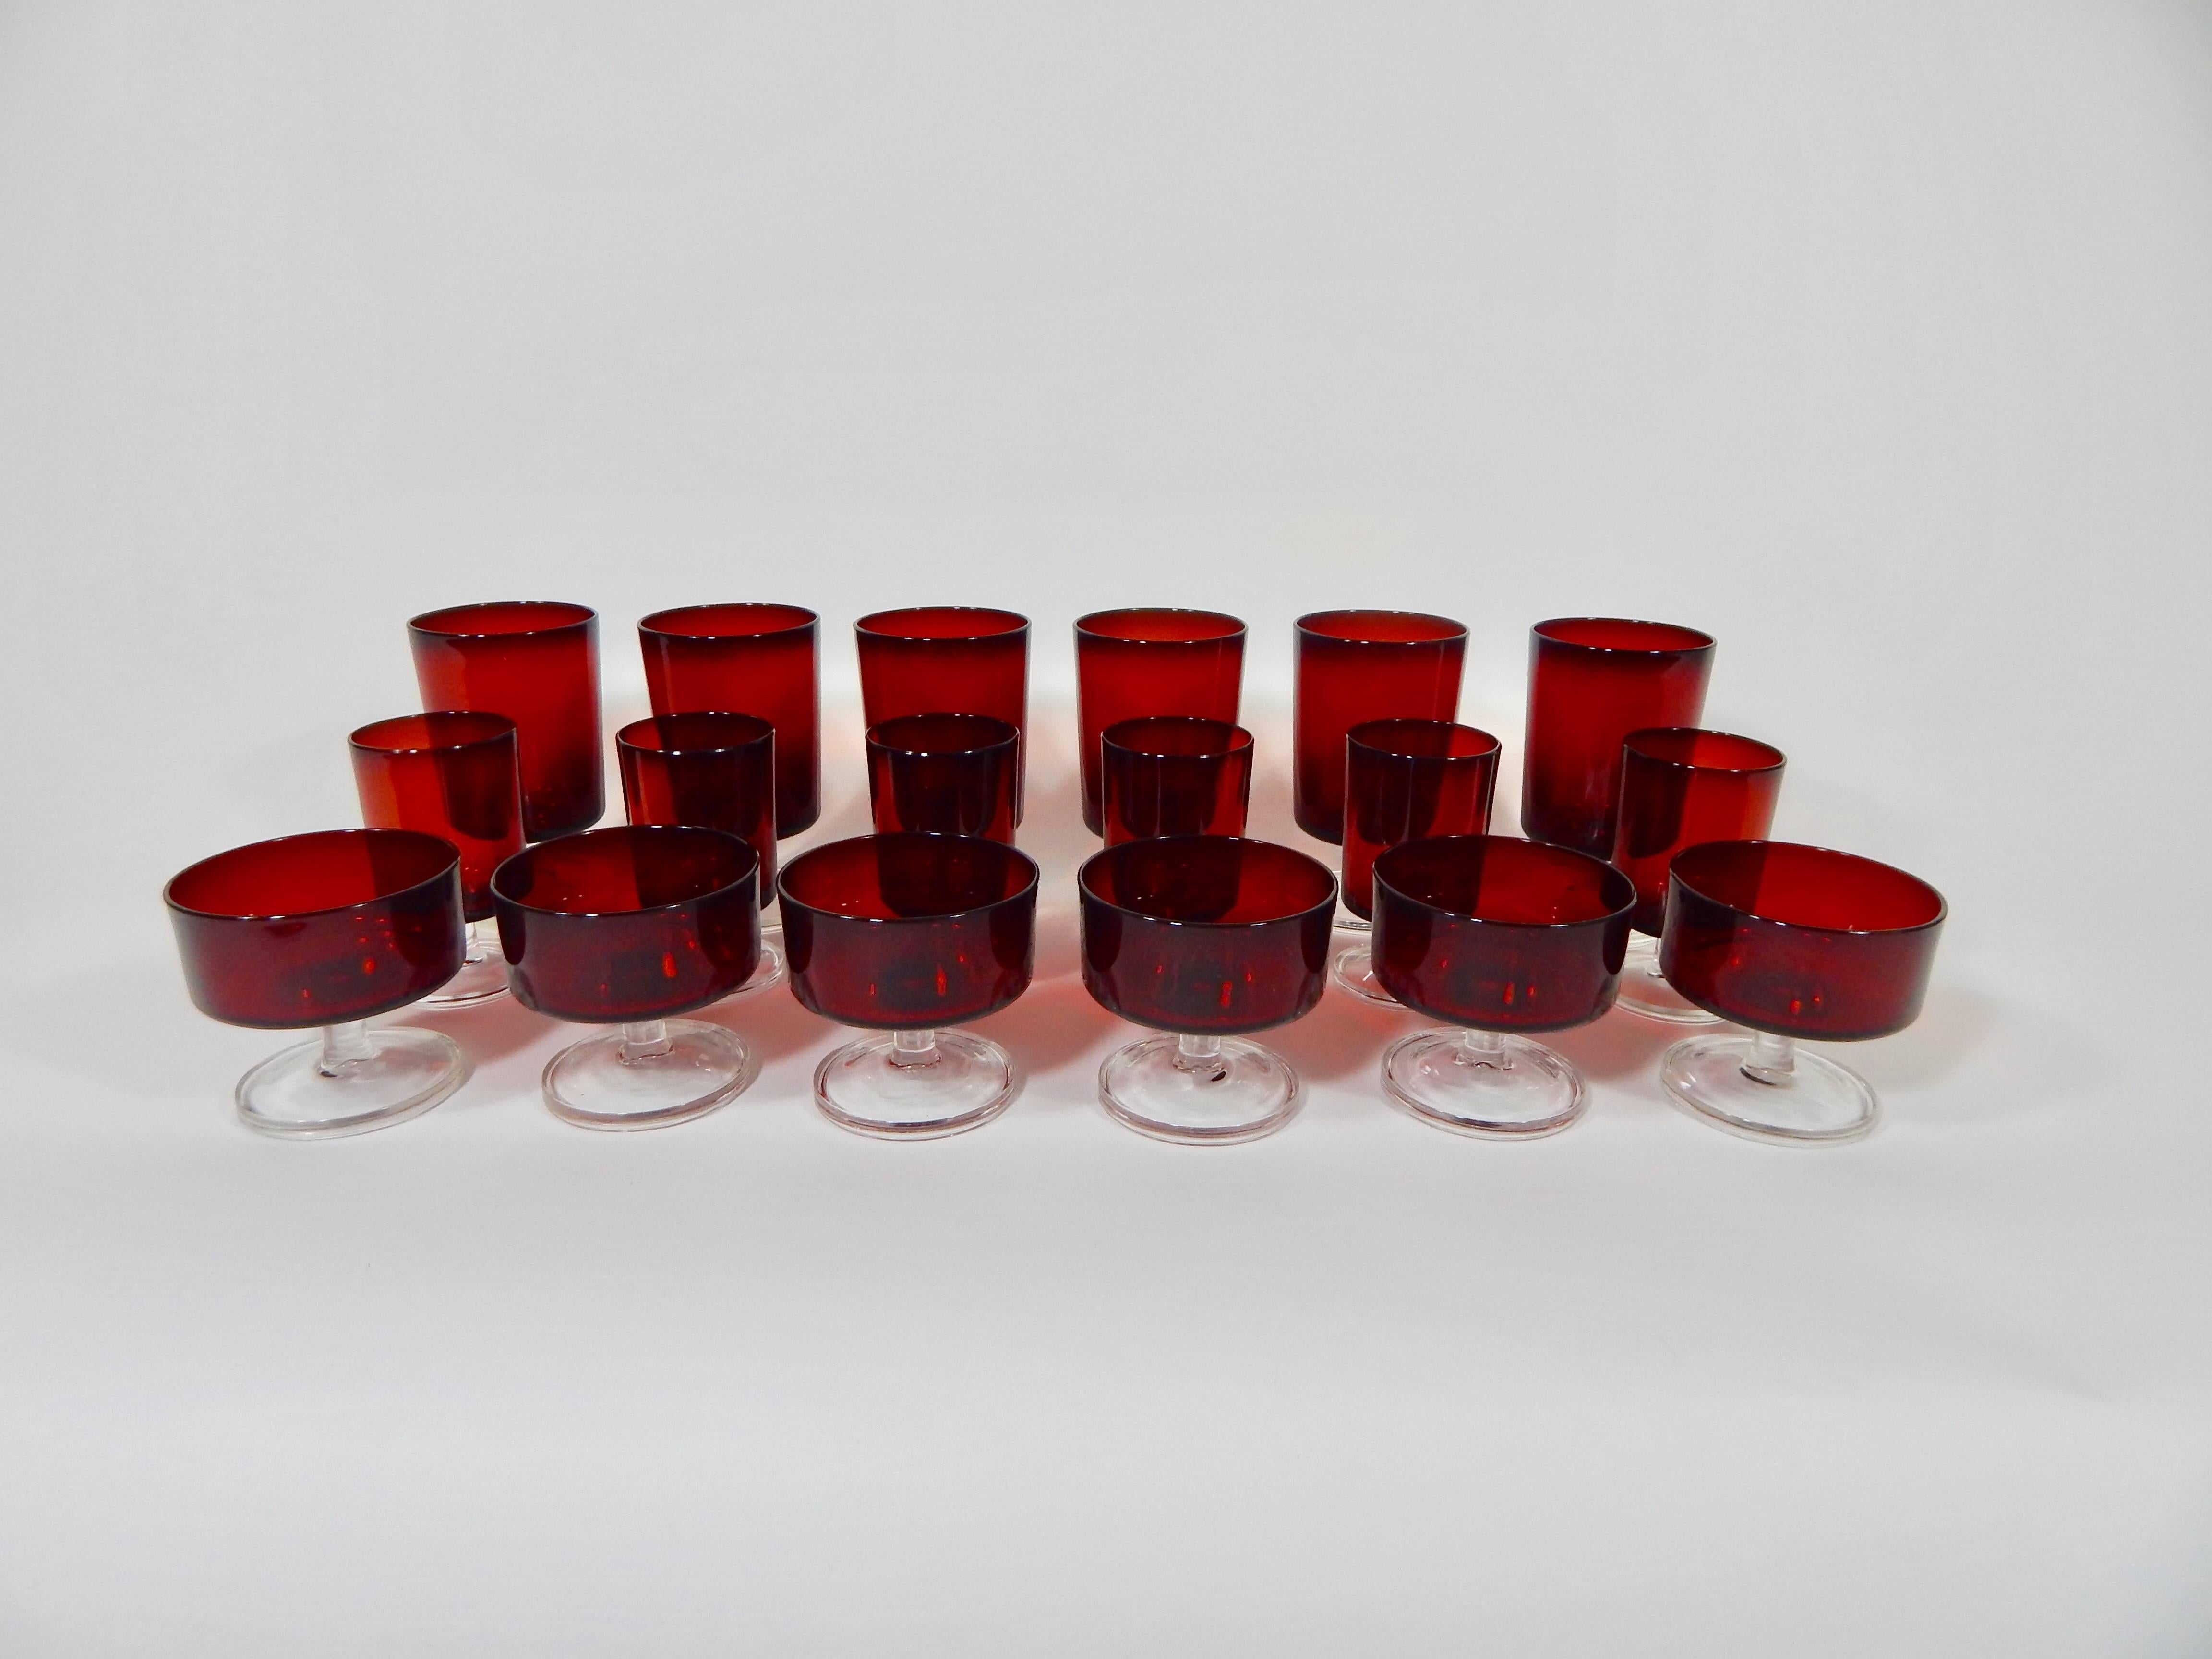 Midcentury Cocktail glasses. Total of 36 pieces. 12 of each size or setting for 12.  All marked France. Beautiful color of Ruby red with clear glass base and stems. Perfect addition for any fabulous table setting or bar. Although photo only show 6